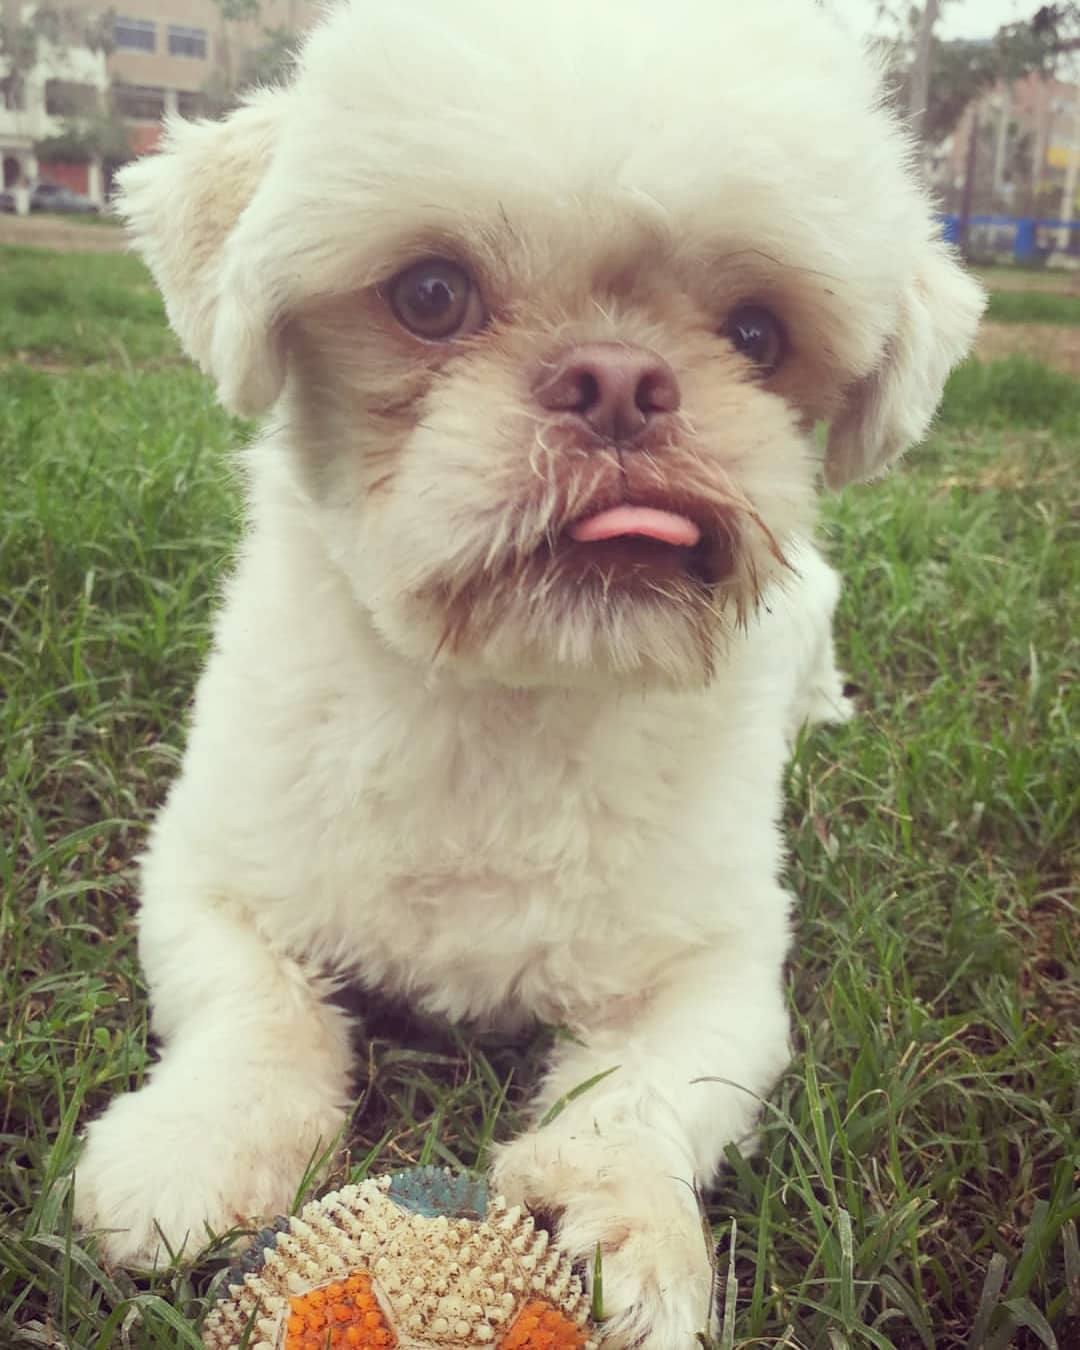 Shih Tzu lying on the grass with a ball in front of him